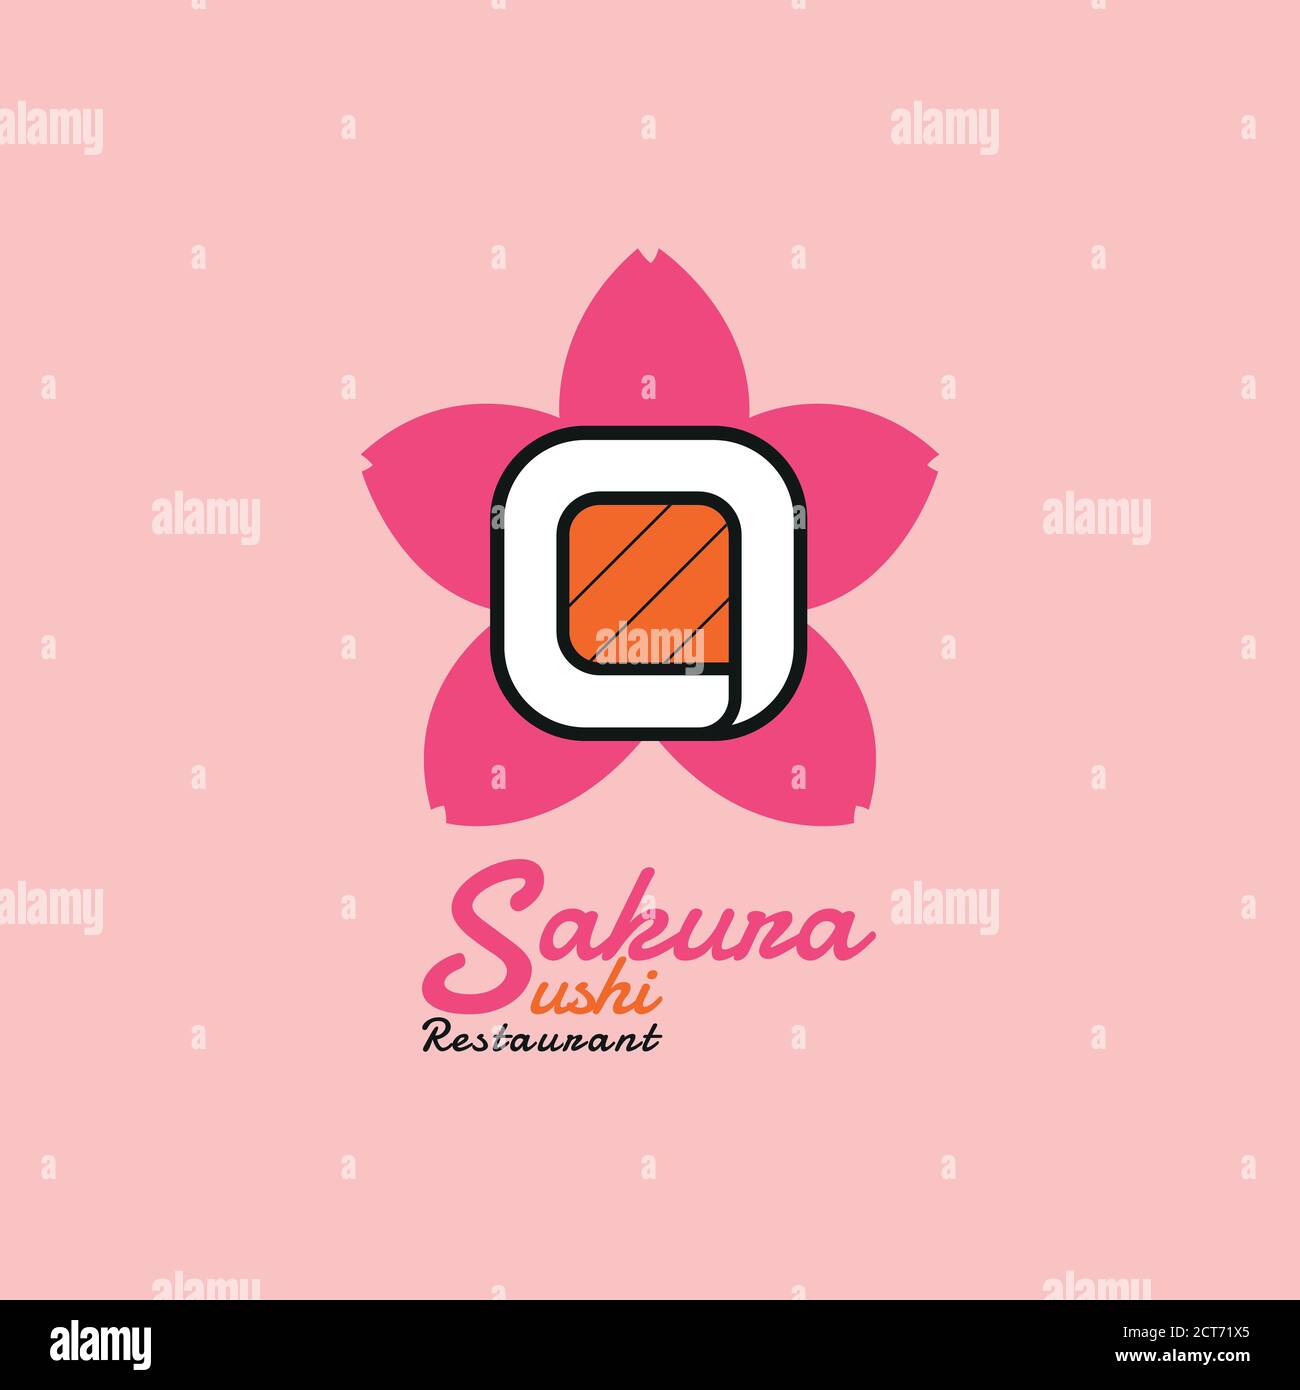 This is a logo design, for a sushi restaurant. By combining 2 different objects namely sushi and sakura flower petals. Stock Vector